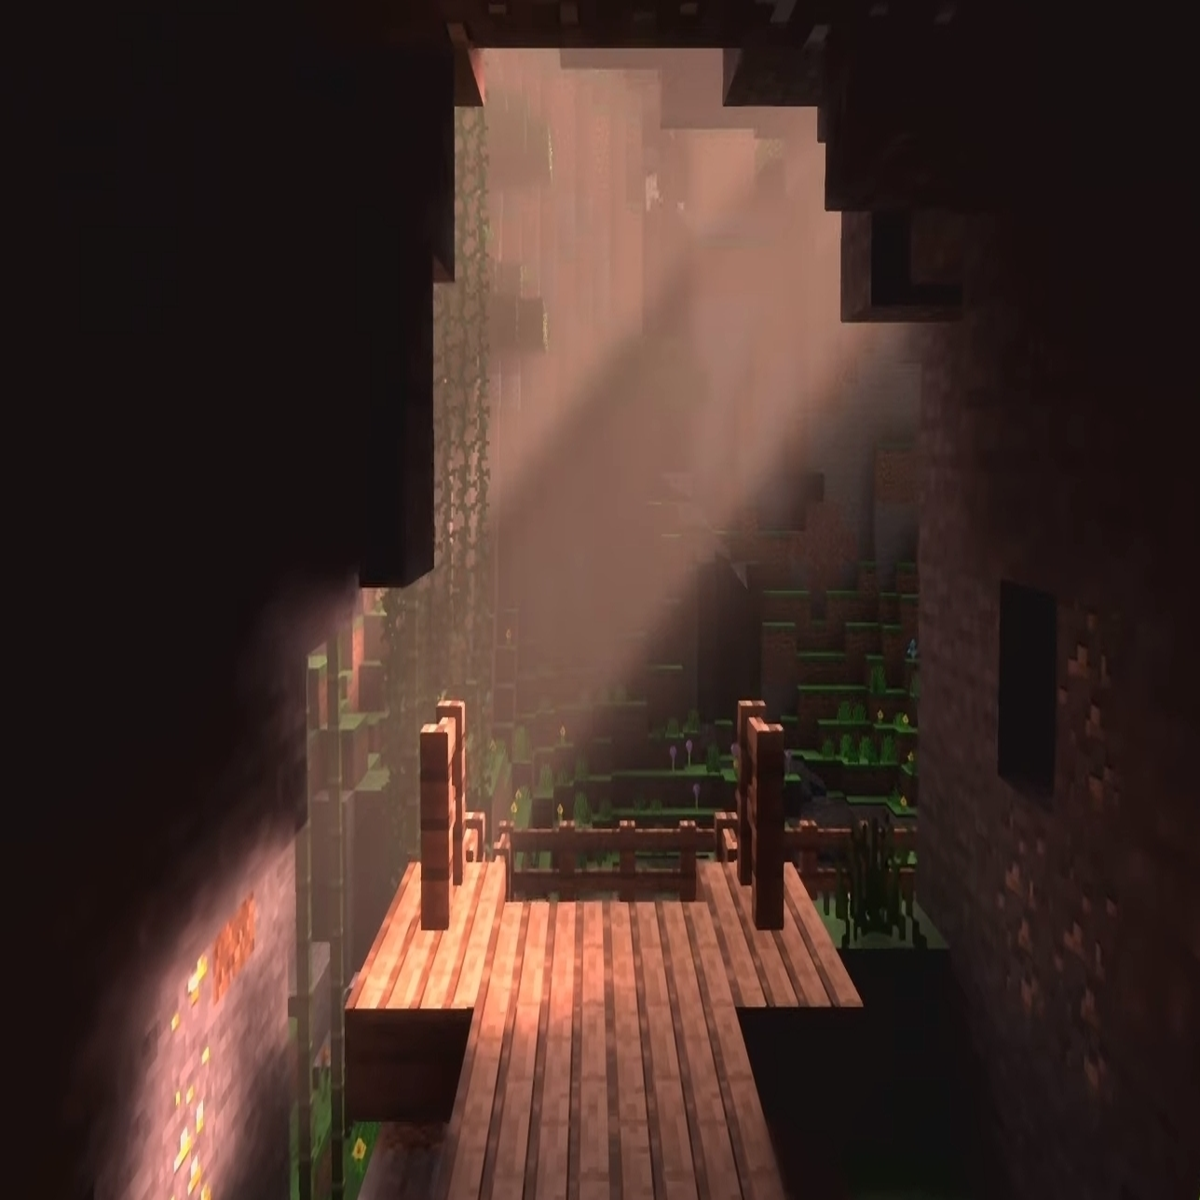 Experiencing Minecraft RTX: A Whole New Ray-Traced World